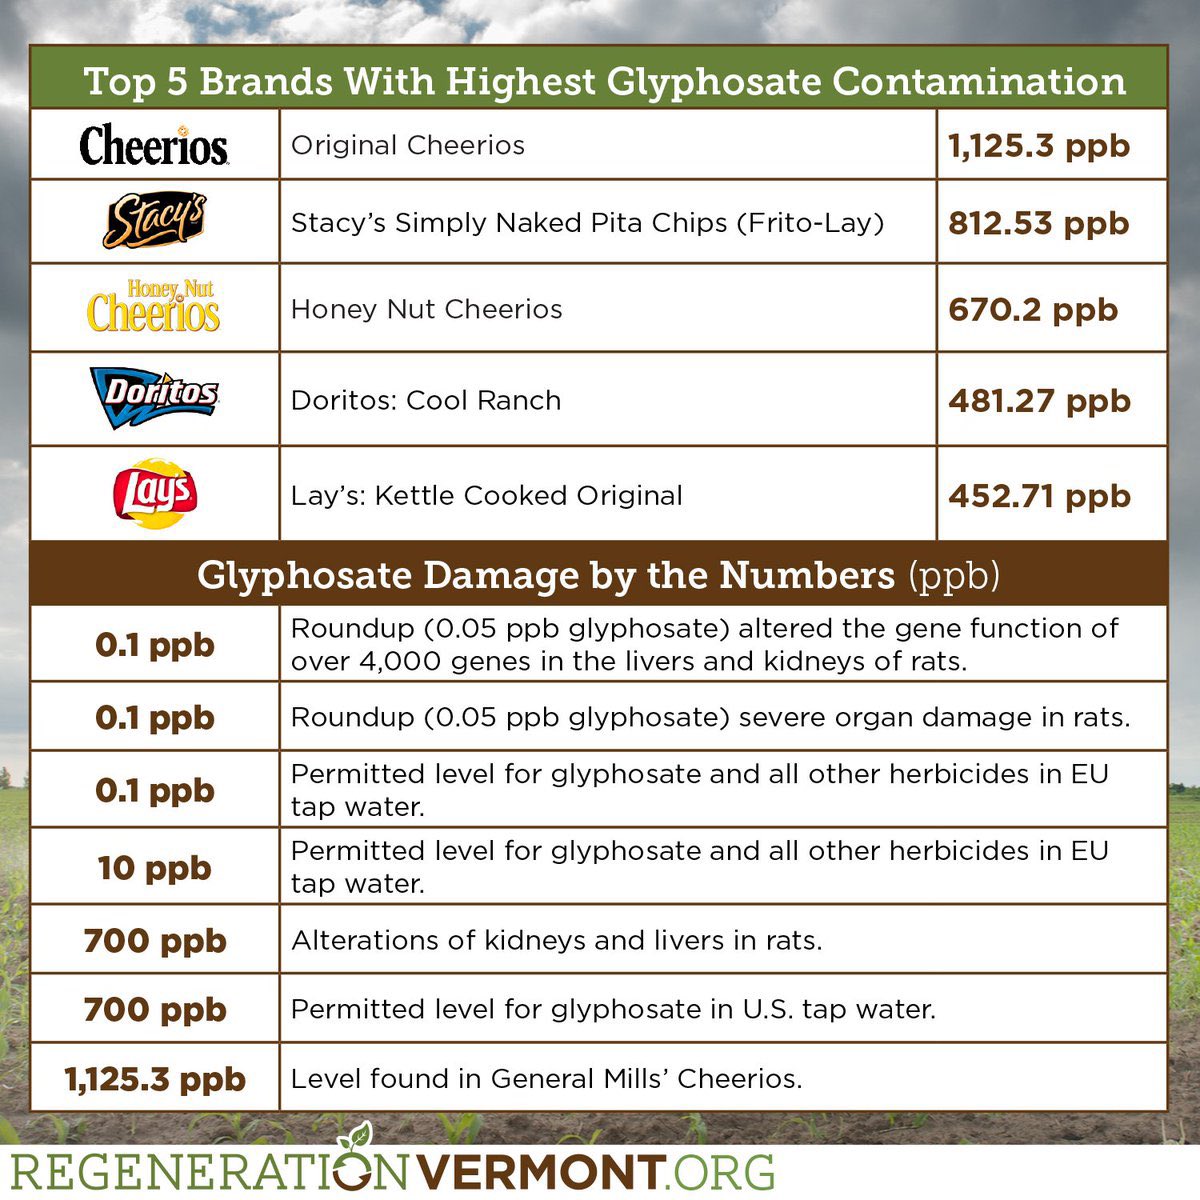 @WallStreetApes In 2016, the FDA stopped testing food for glyphosate residue. 

Glyphosate was mostly highly  concentrated in these products. 

Wonder how much the corrupt FDA received from these companies?